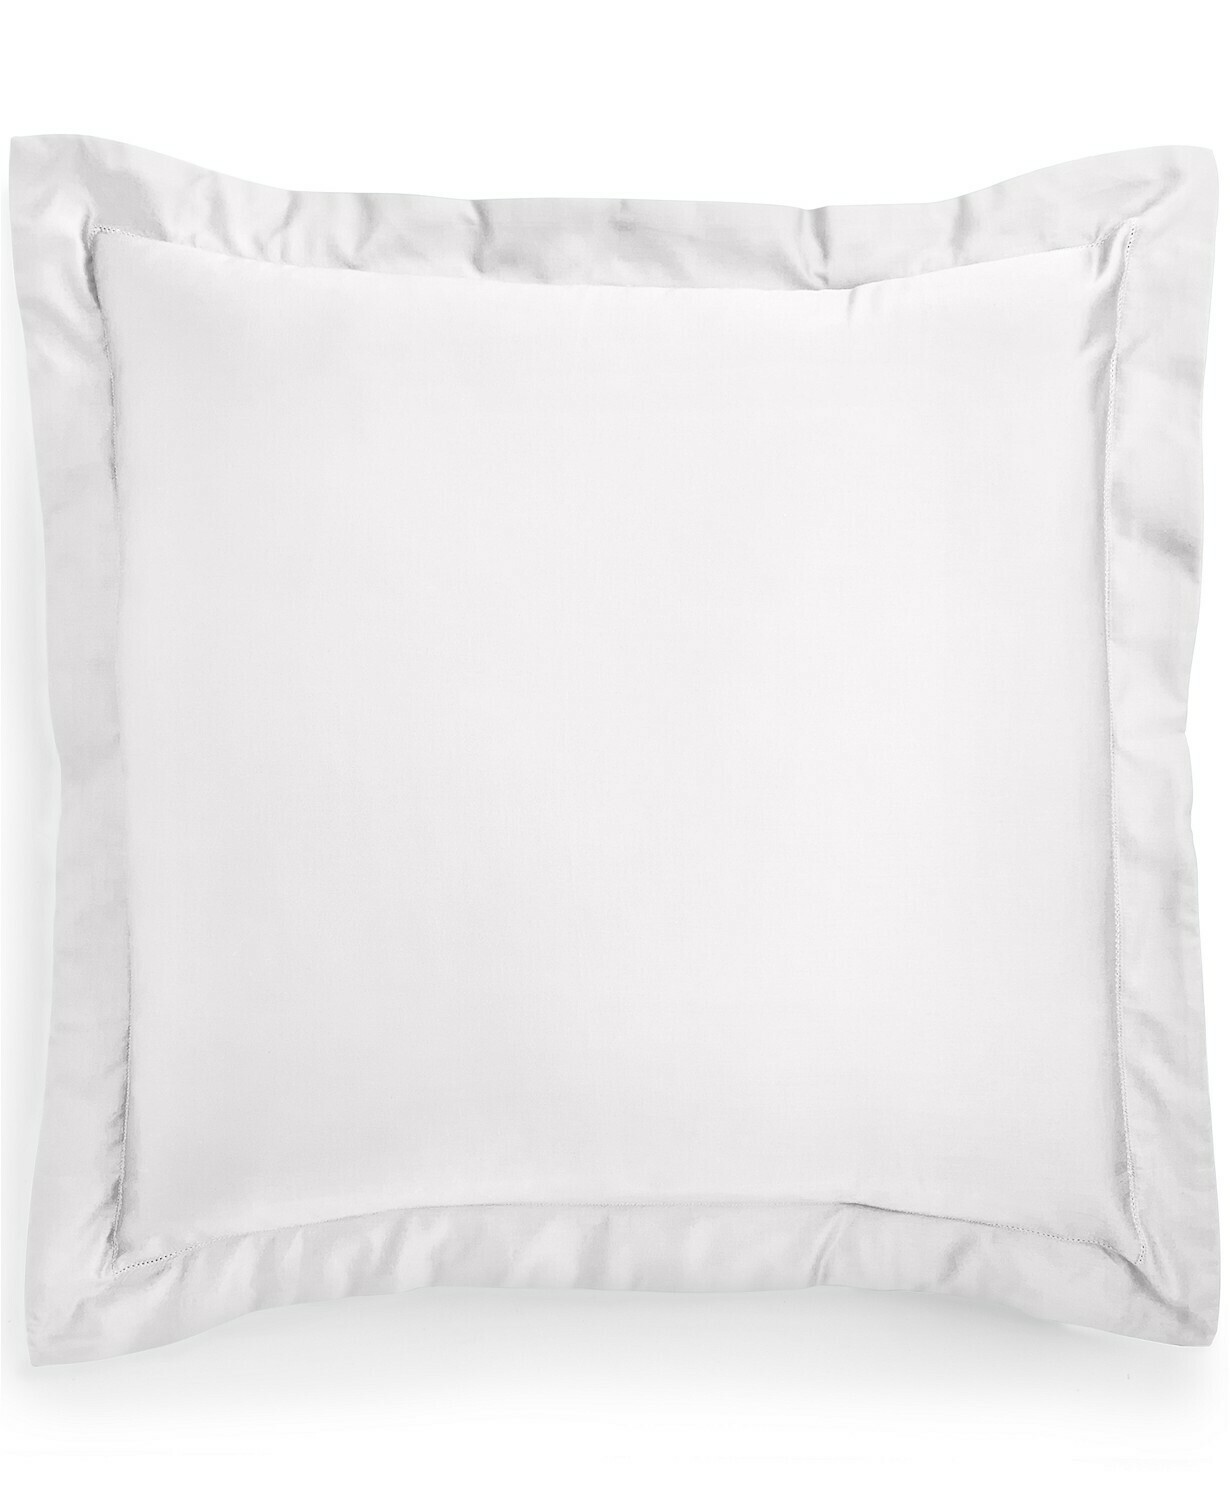 Charter Club Damask Solid 500 Count EURO Pillow Sham